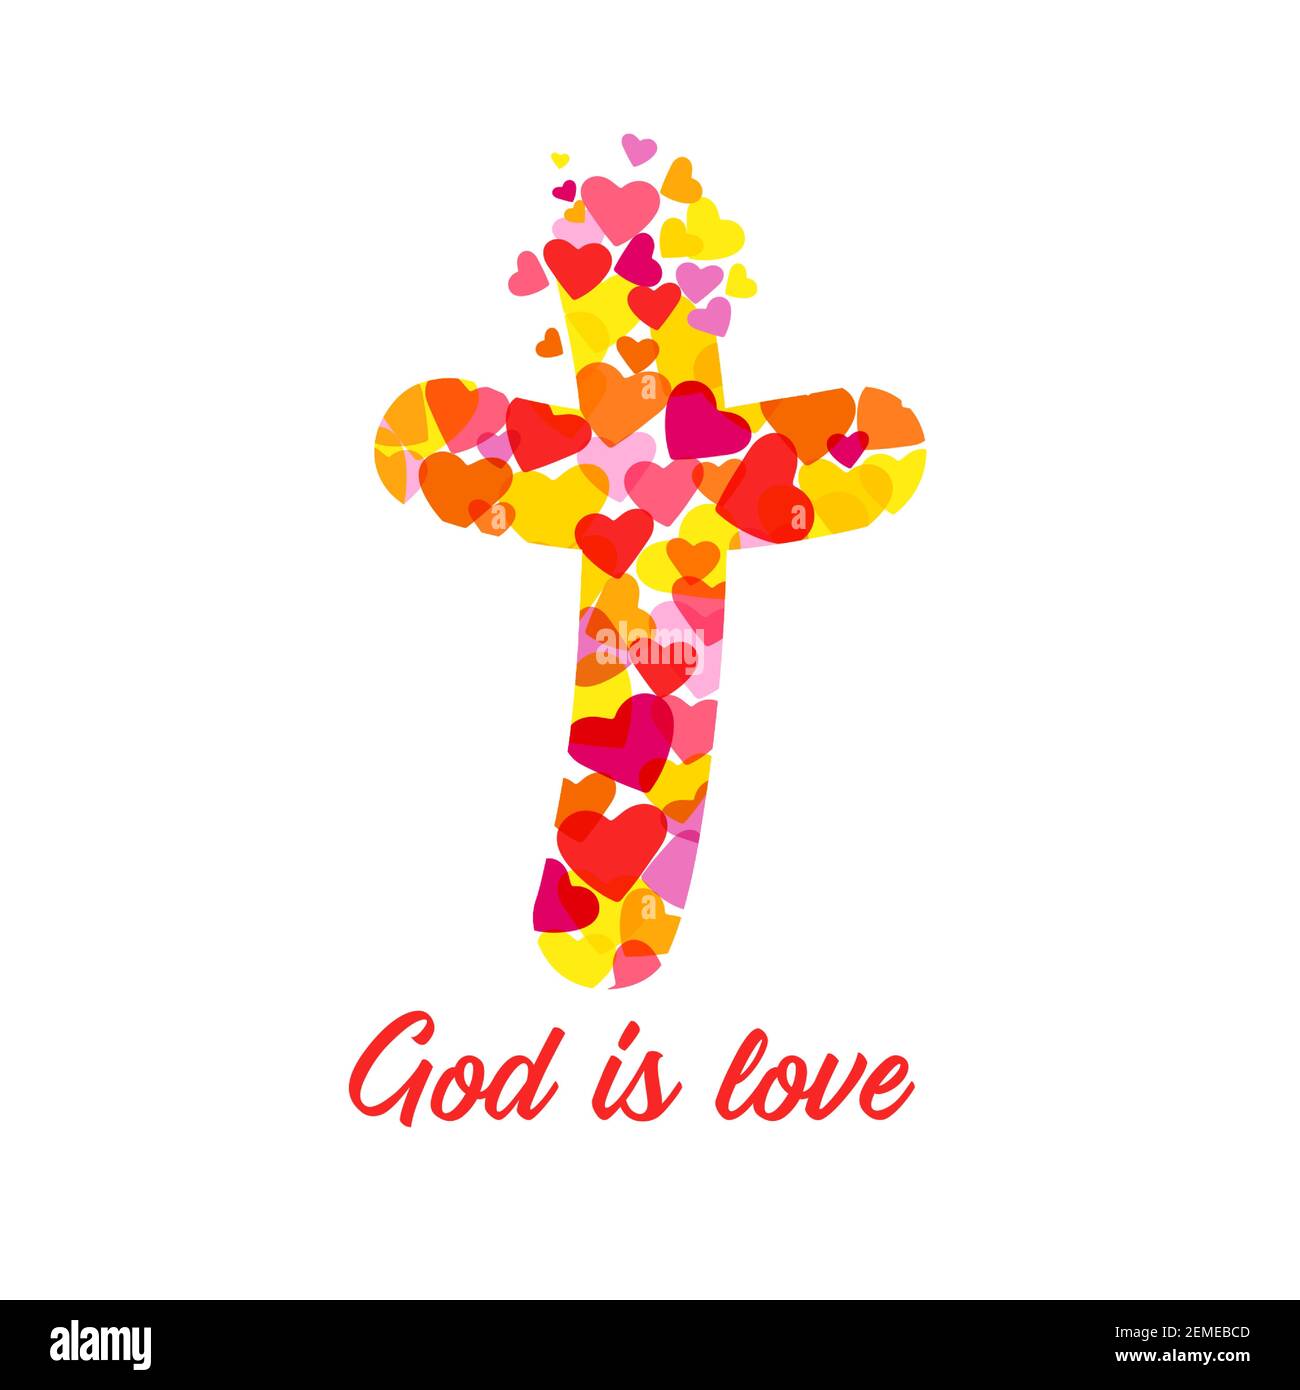 Cross logo God Is Love. Christian church sign. Colored crucifixion. Religious symbol and lettering. Greeting card or congrats concept. Abstract isolat Stock Vector